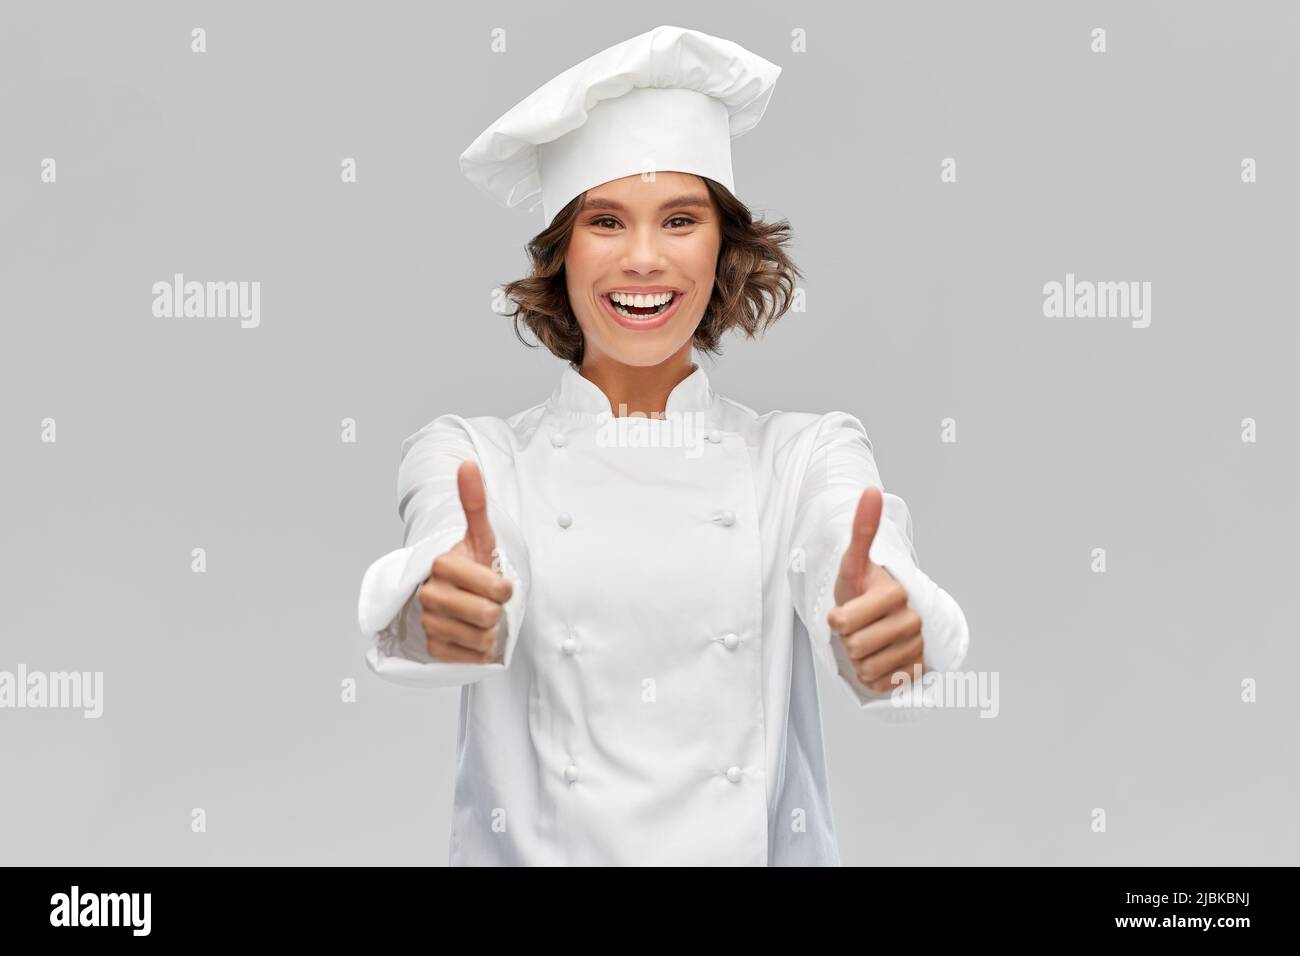 smiling female chef in toque showing thumbs up Stock Photo